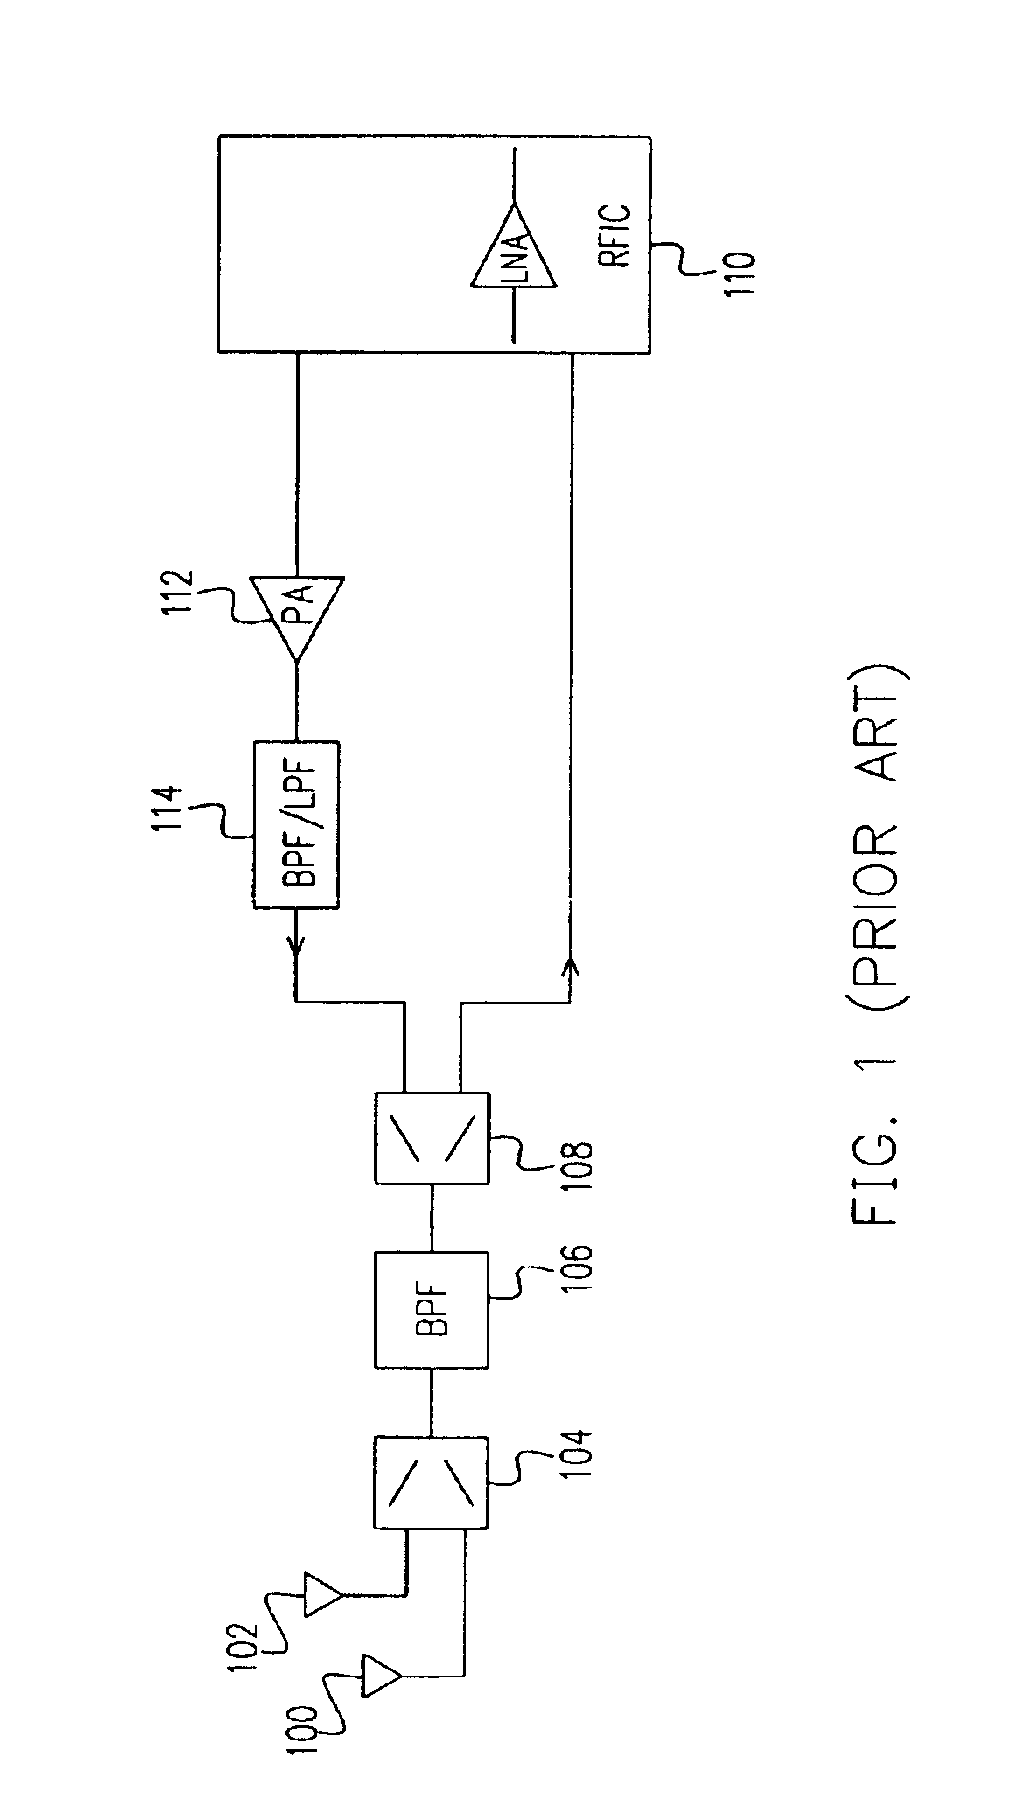 Layout of wireless communication circuit on a printed circuit board